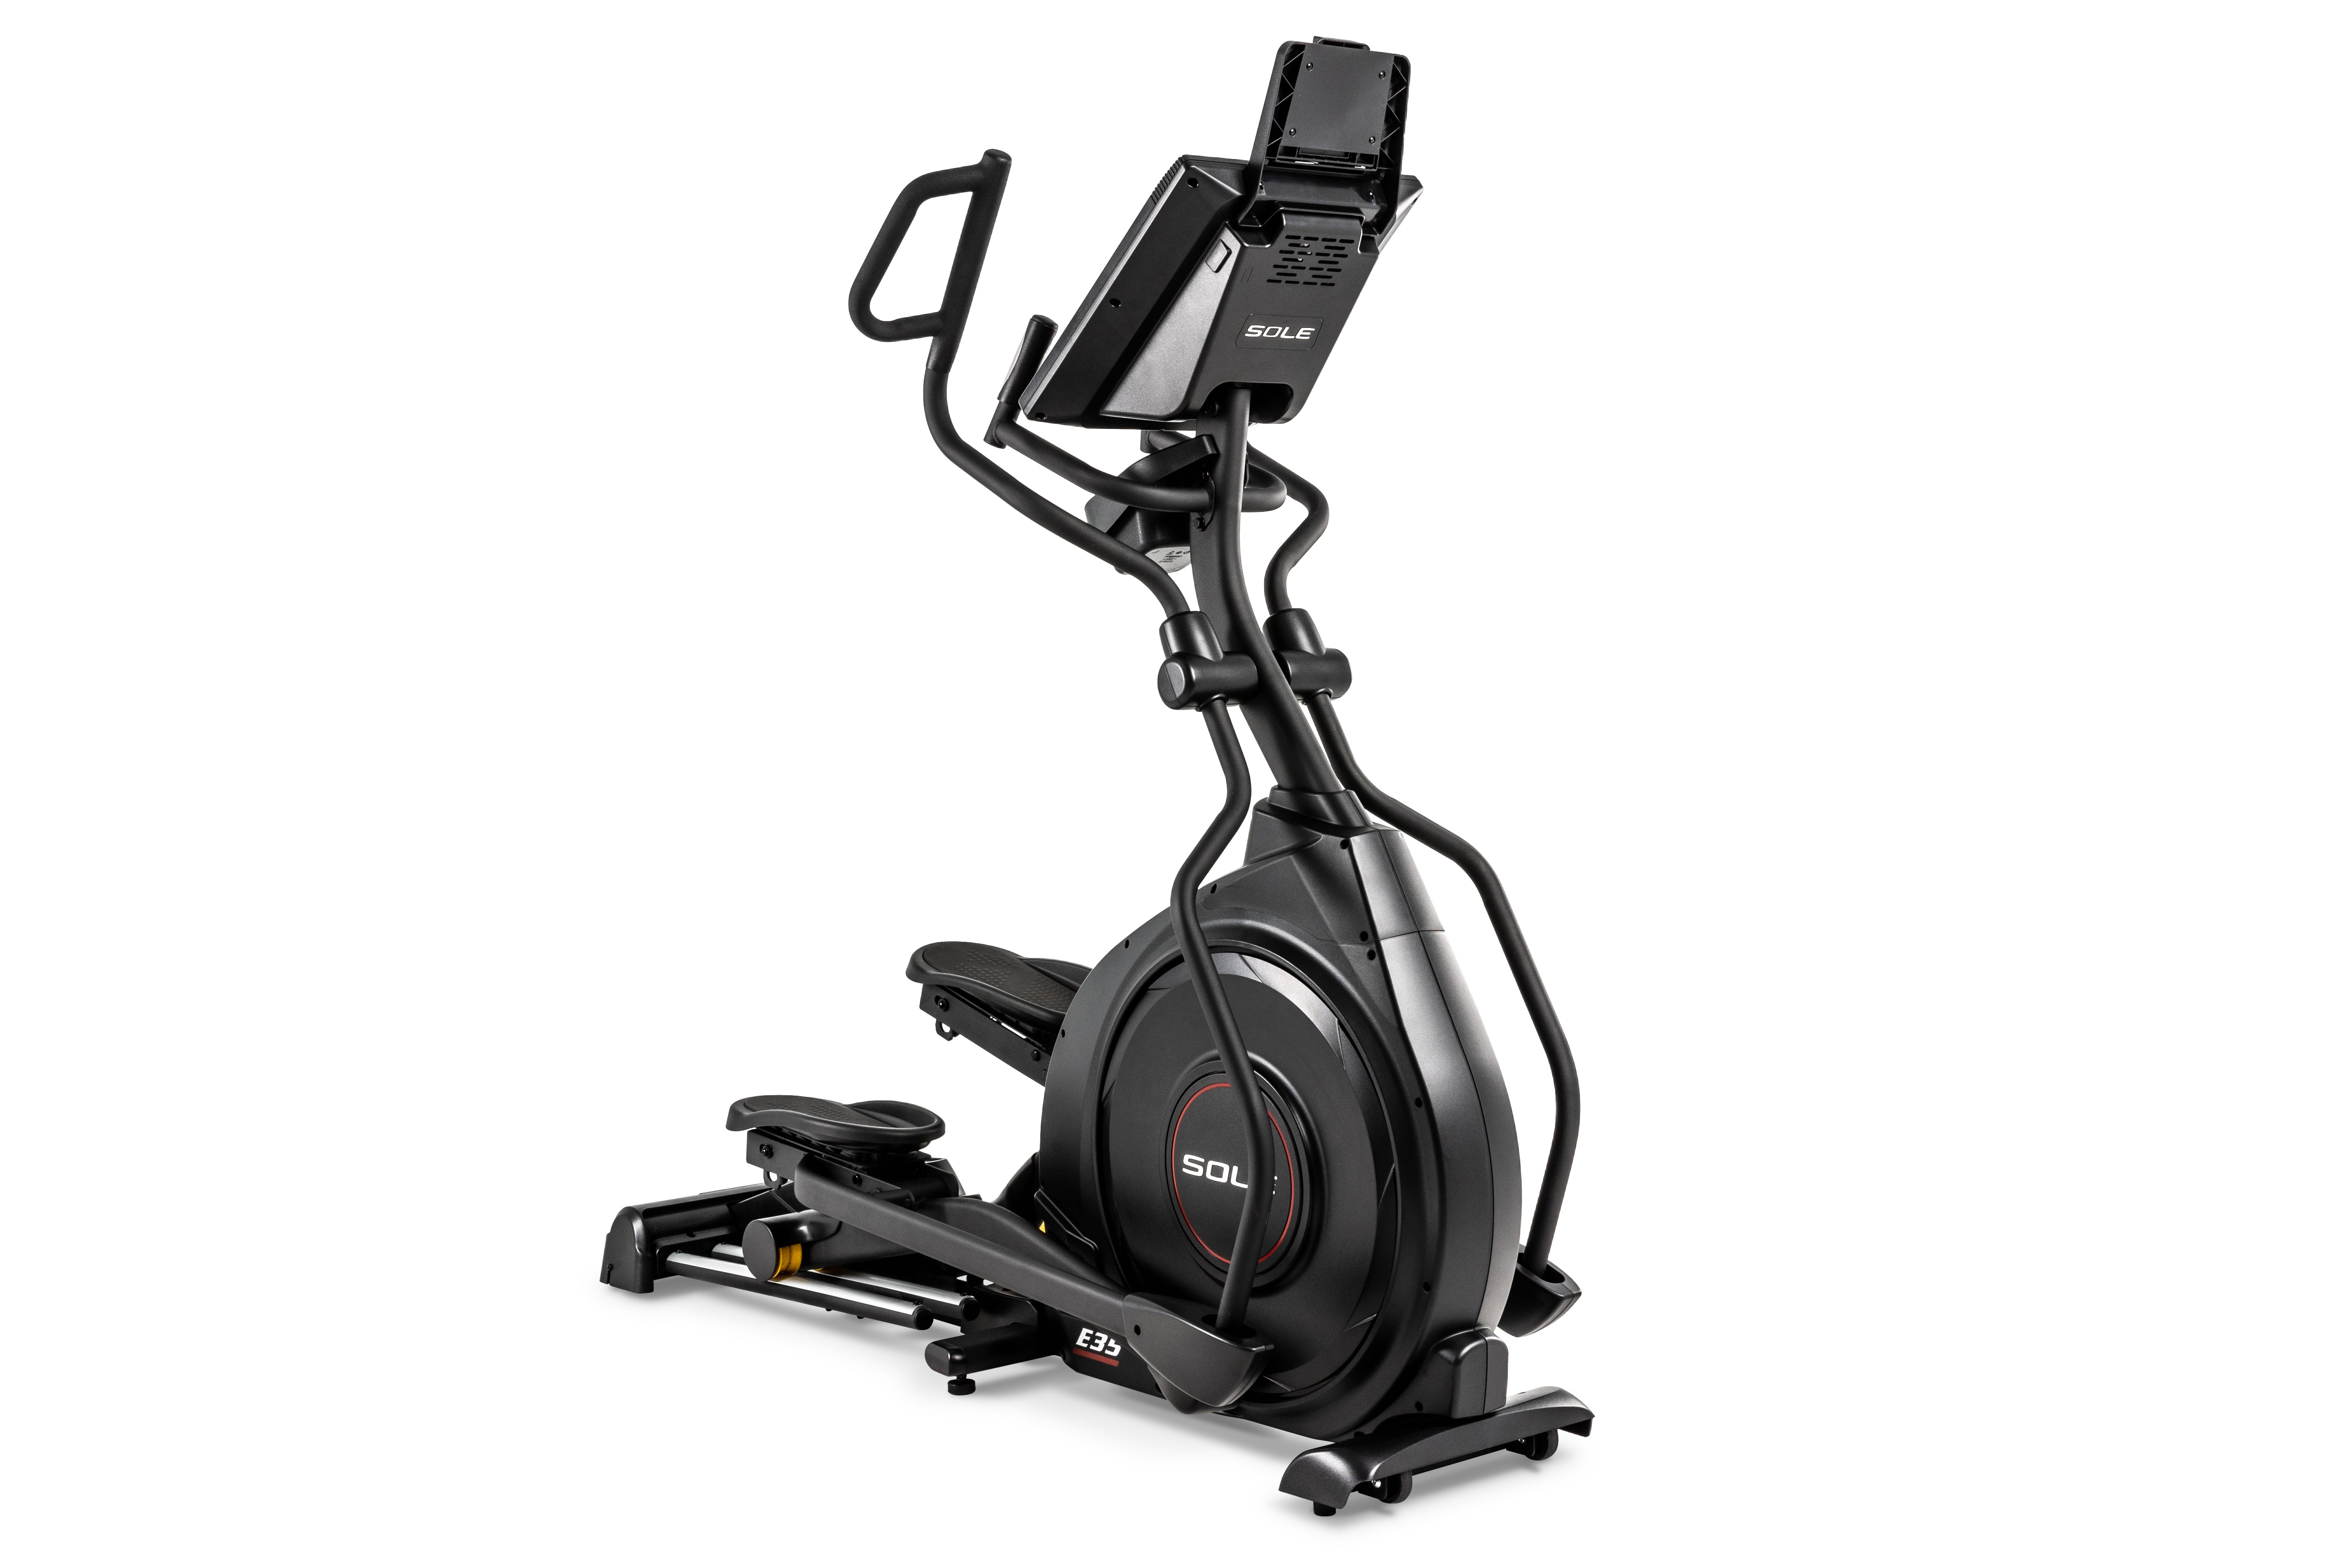 Sole E35 elliptical trainer in a three-quarter view, displaying its ergonomic handlebars, black frame, central flywheel with 'SOLE' branding, and adjustable foot pedals. An 'E35' label is visible on the lower part of the frame.